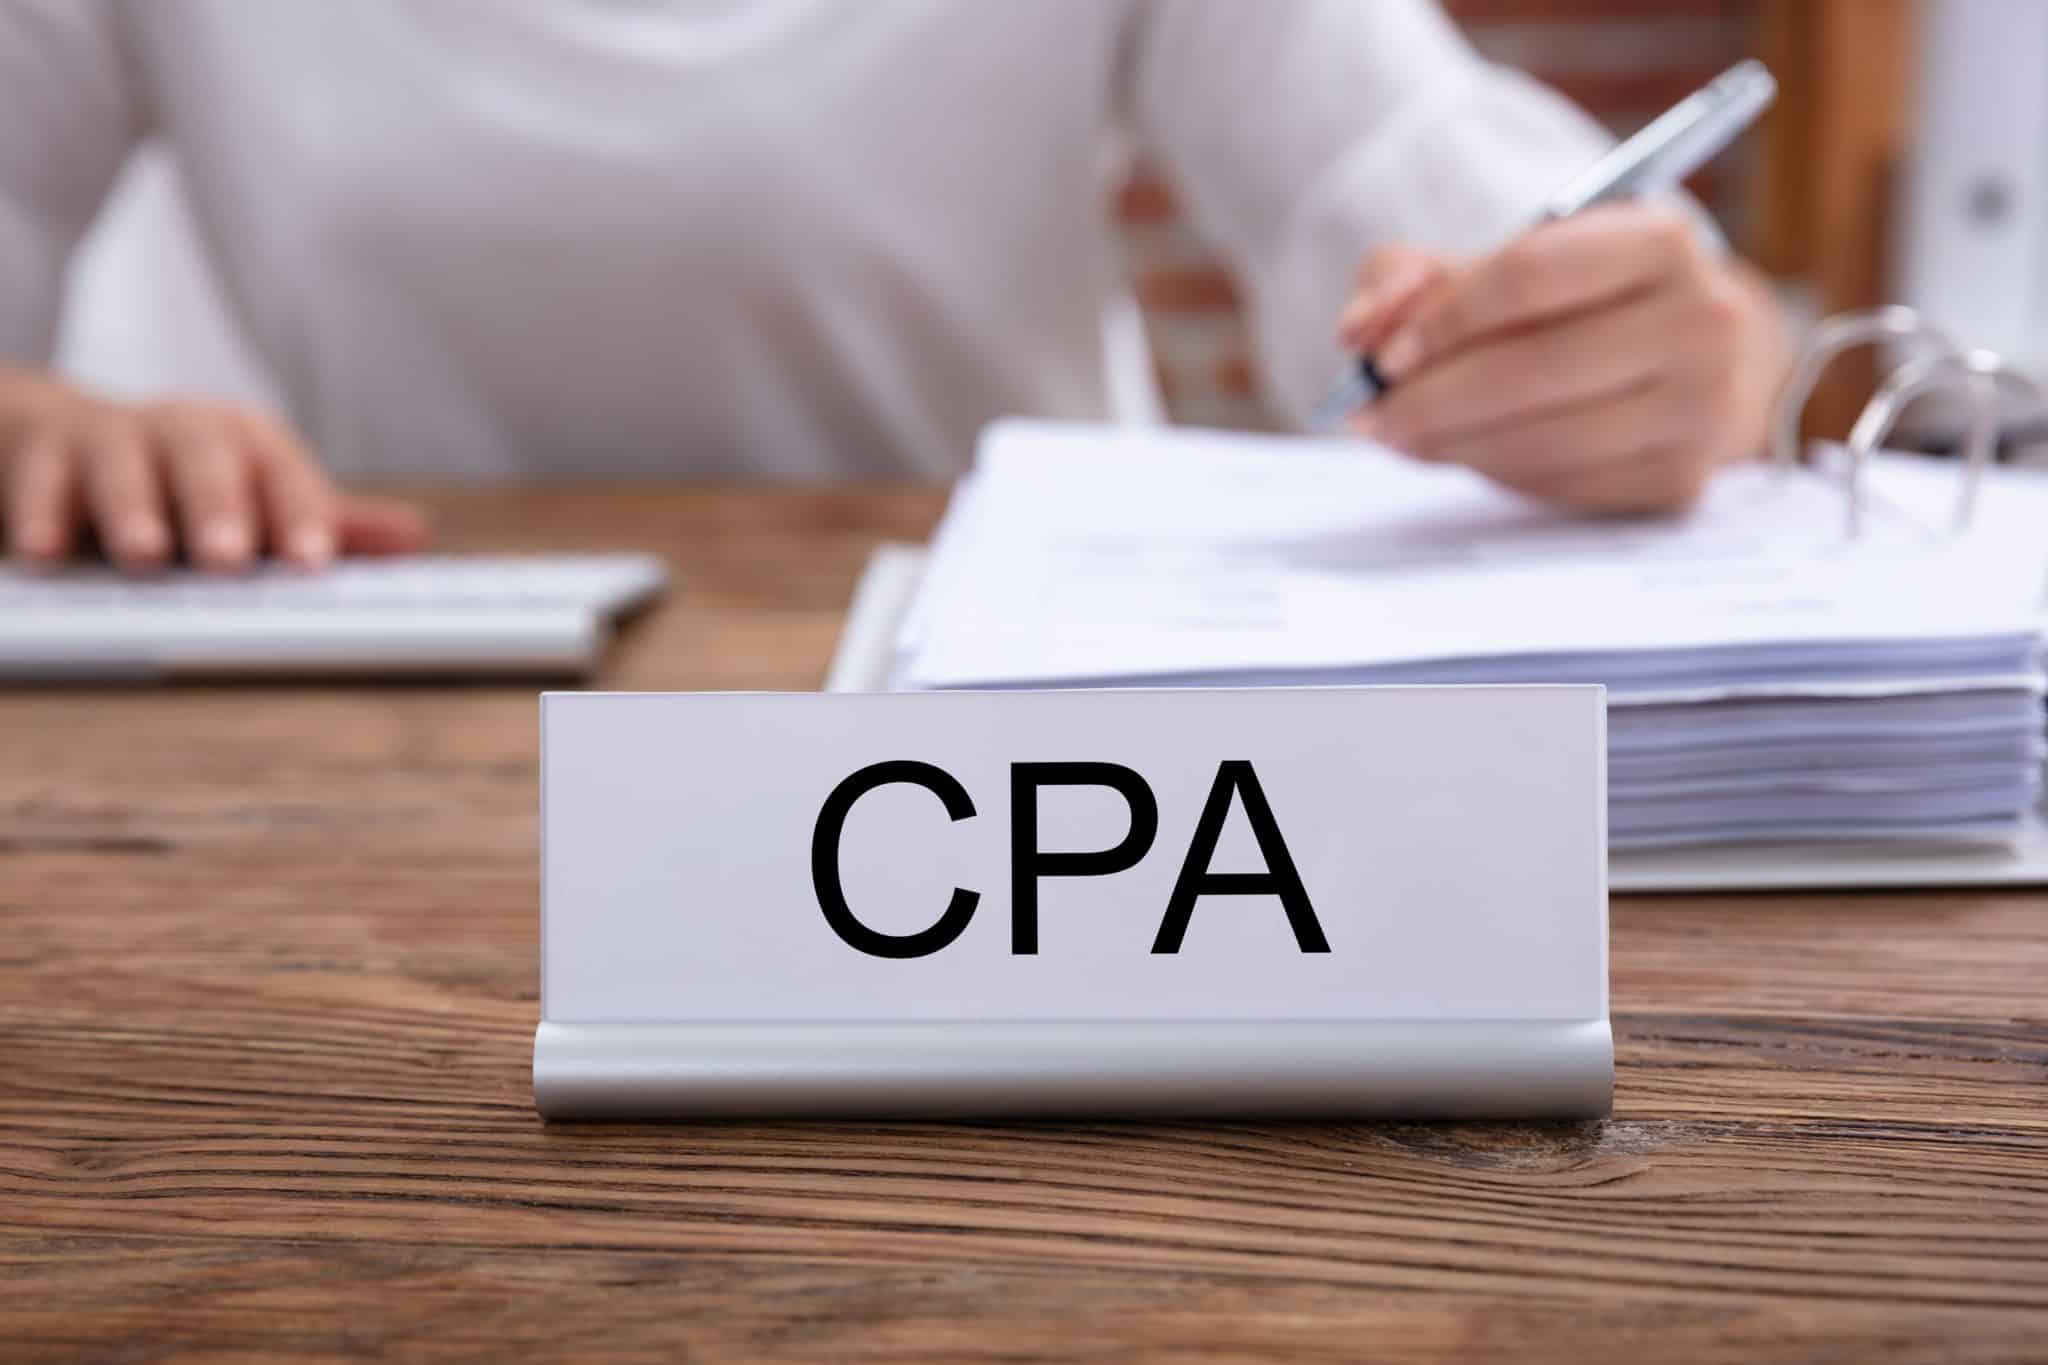 How to Become a CPA in 5 (Easy) Steps